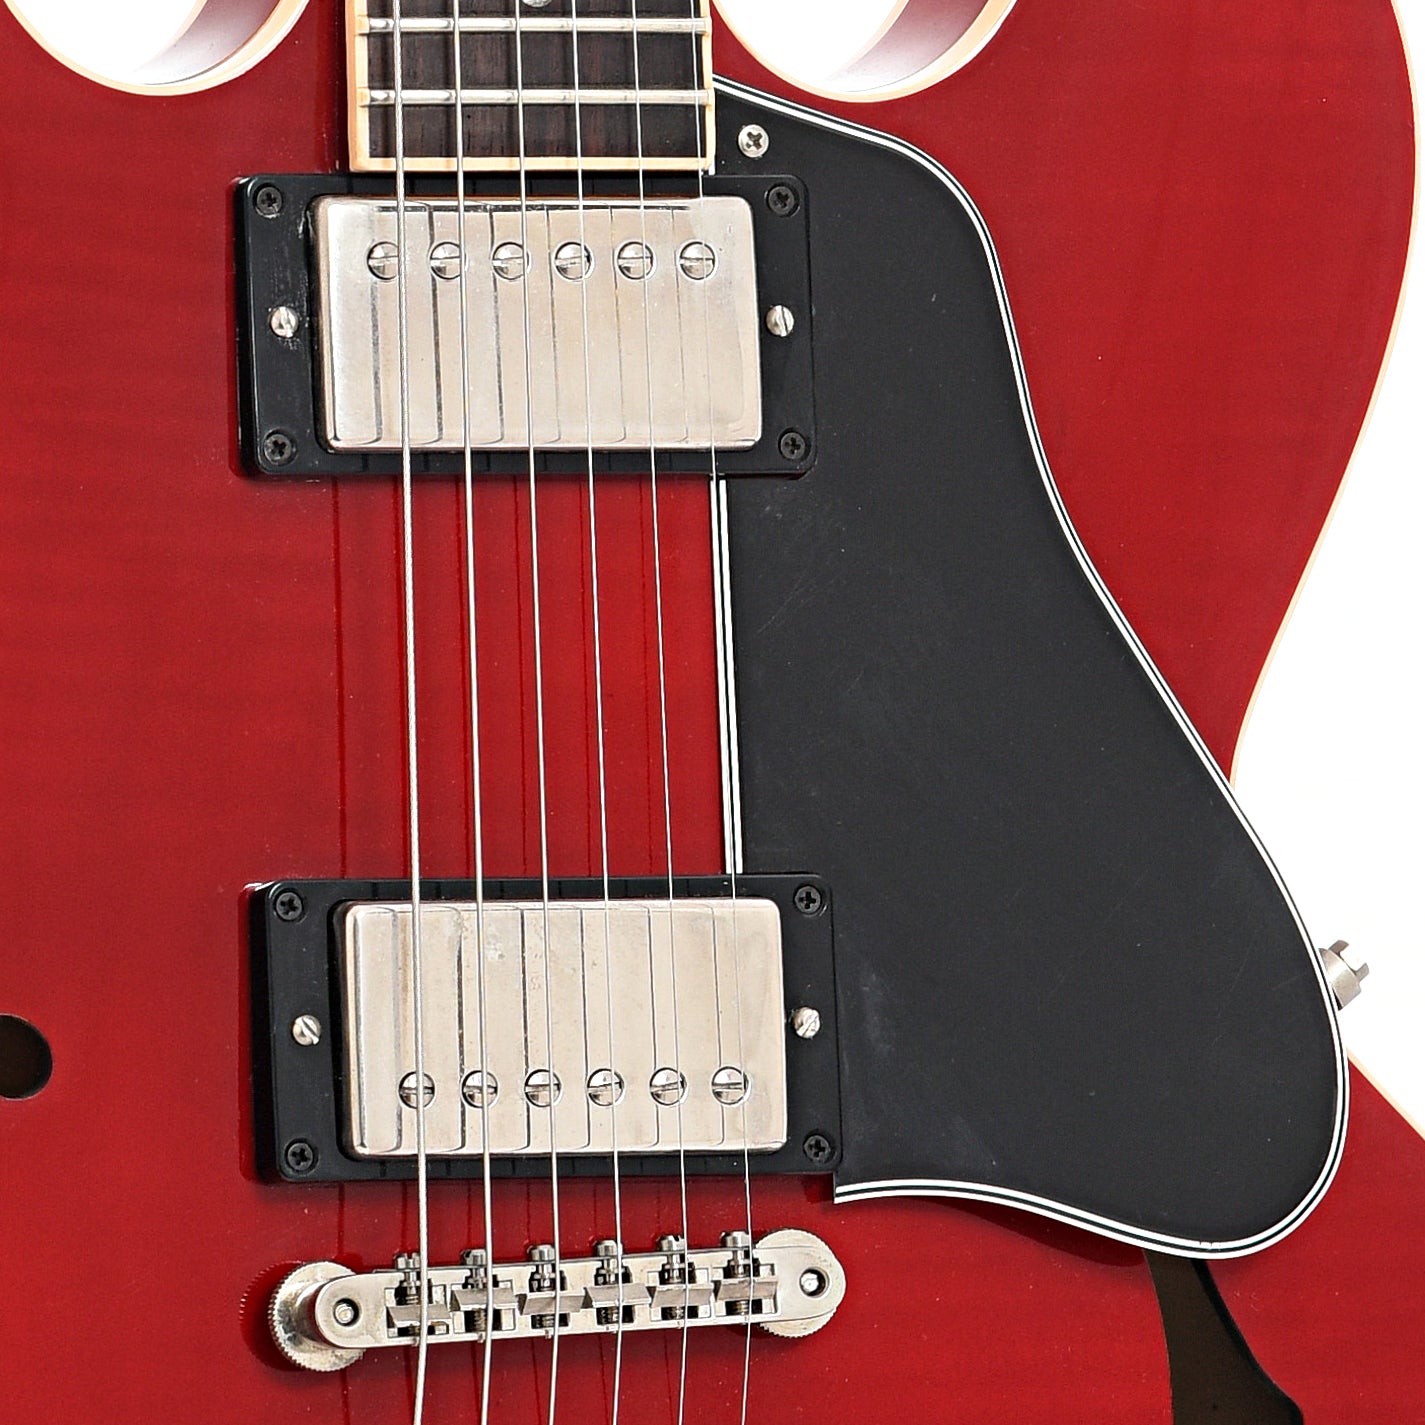 Pickups of Gibson ES-335 Hollow Body Electric Guitar (1999)